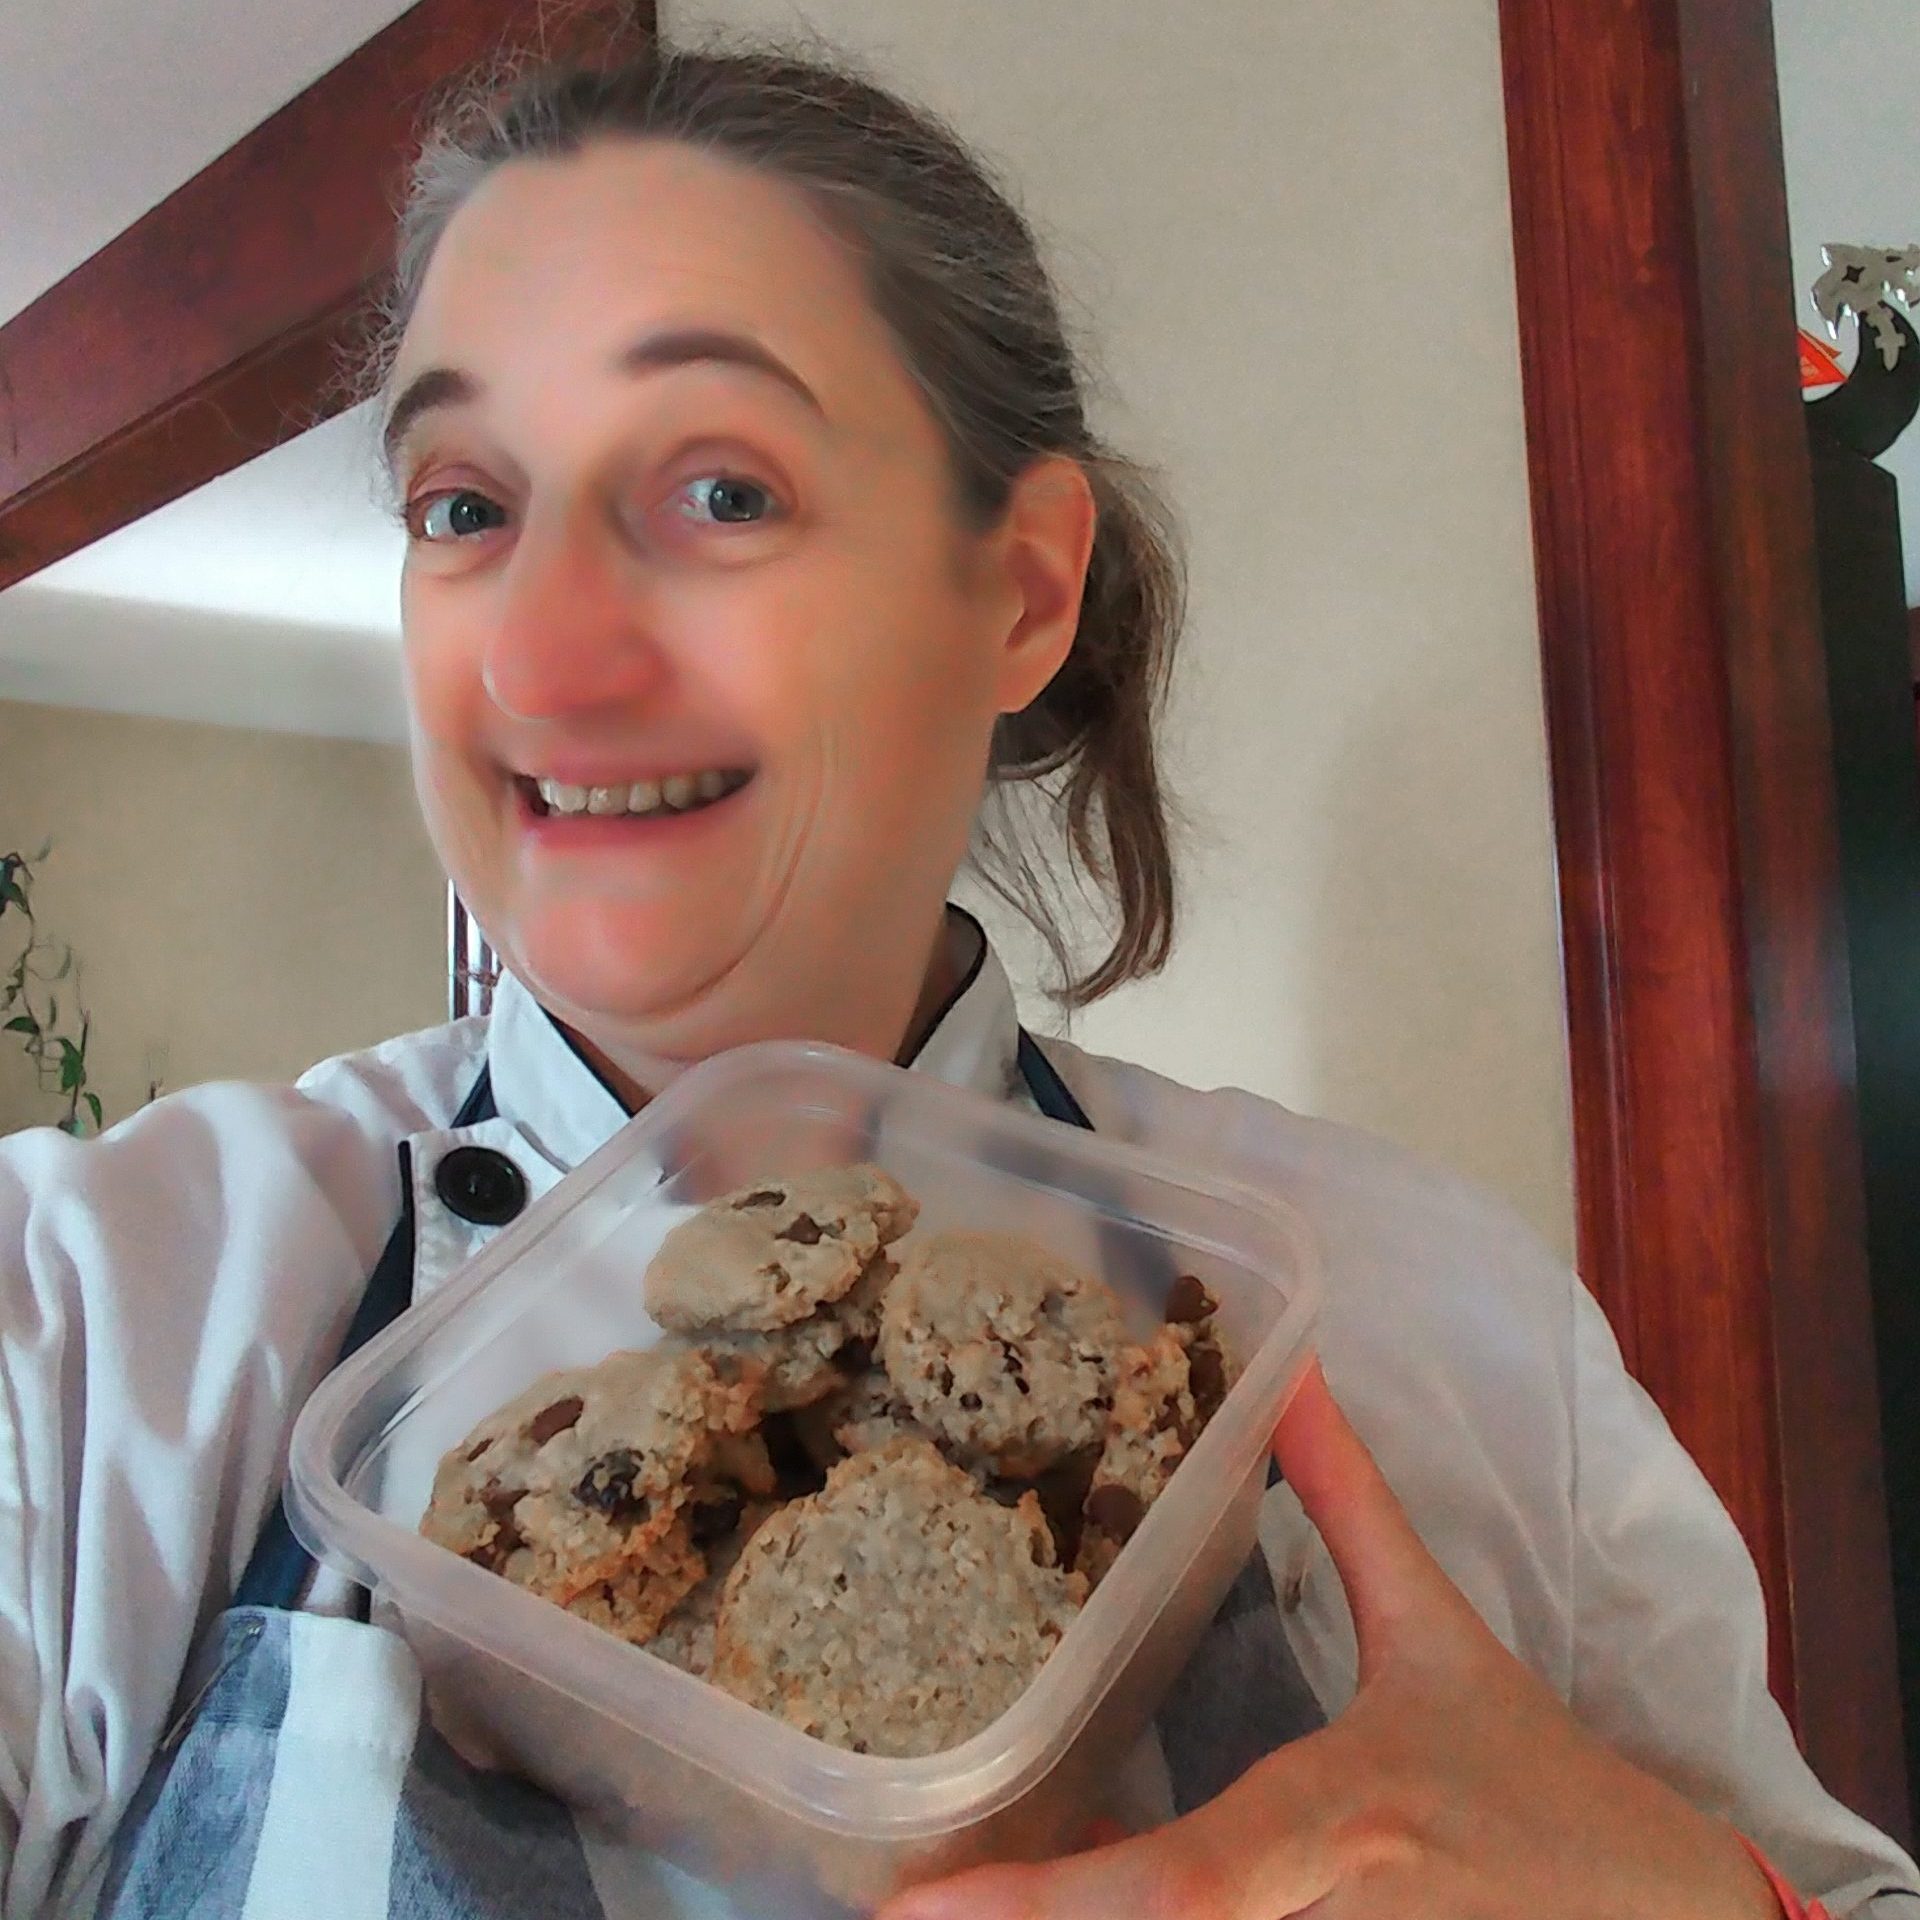 Stephie is showing a batch of cookies she just made.